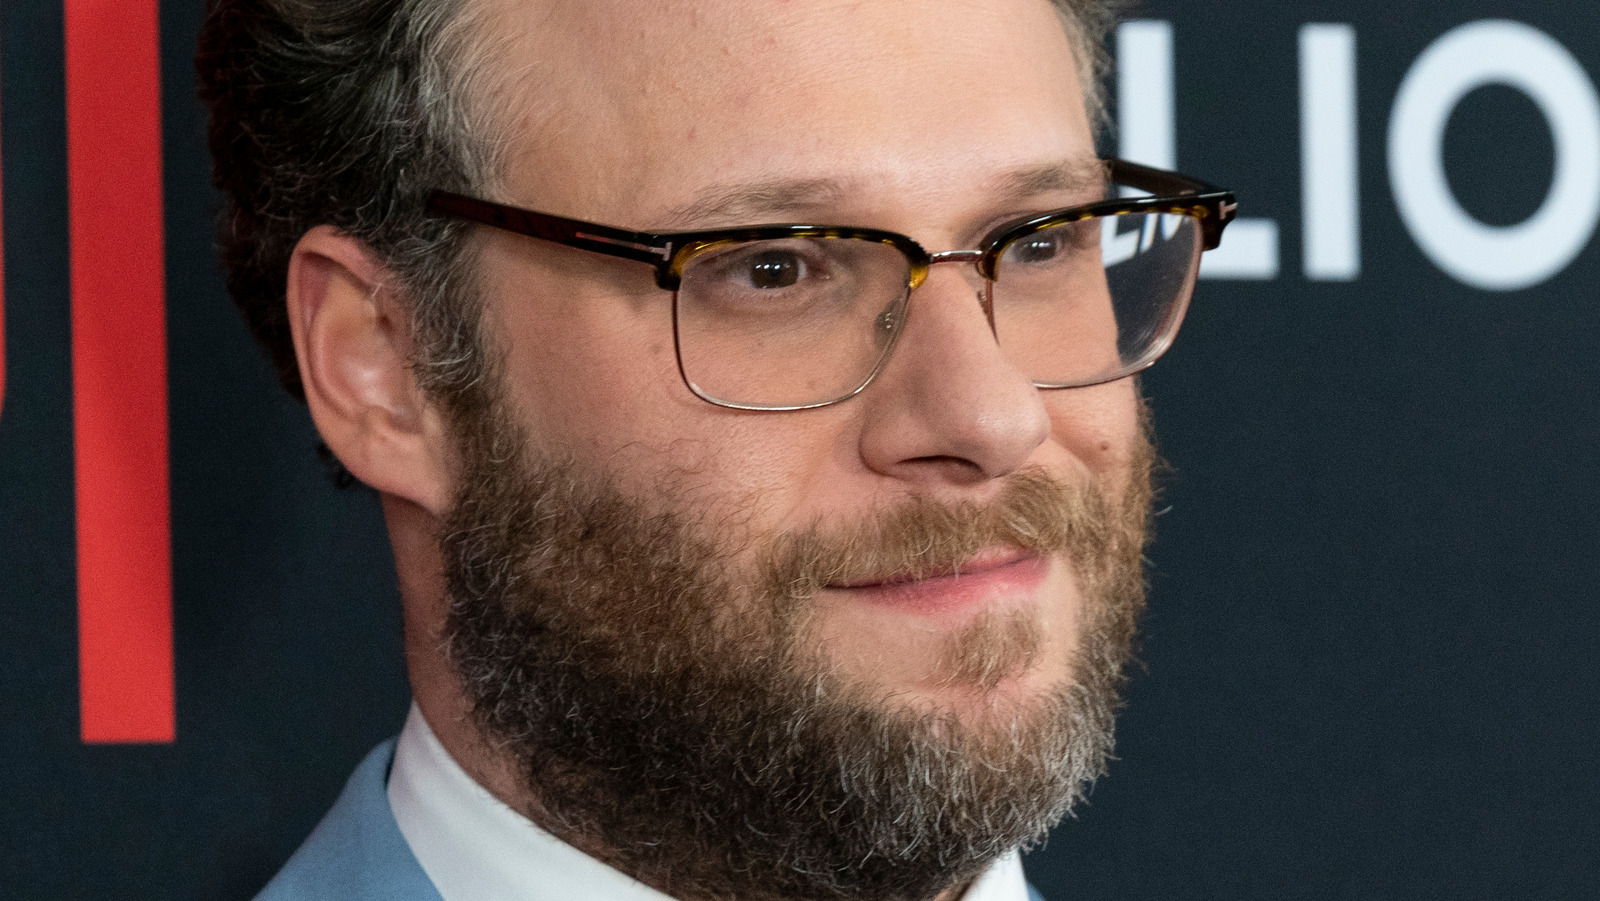 Seth Rogen’s Slimmed Down Appearance At The 2021 Emmys Is Causing A Stir